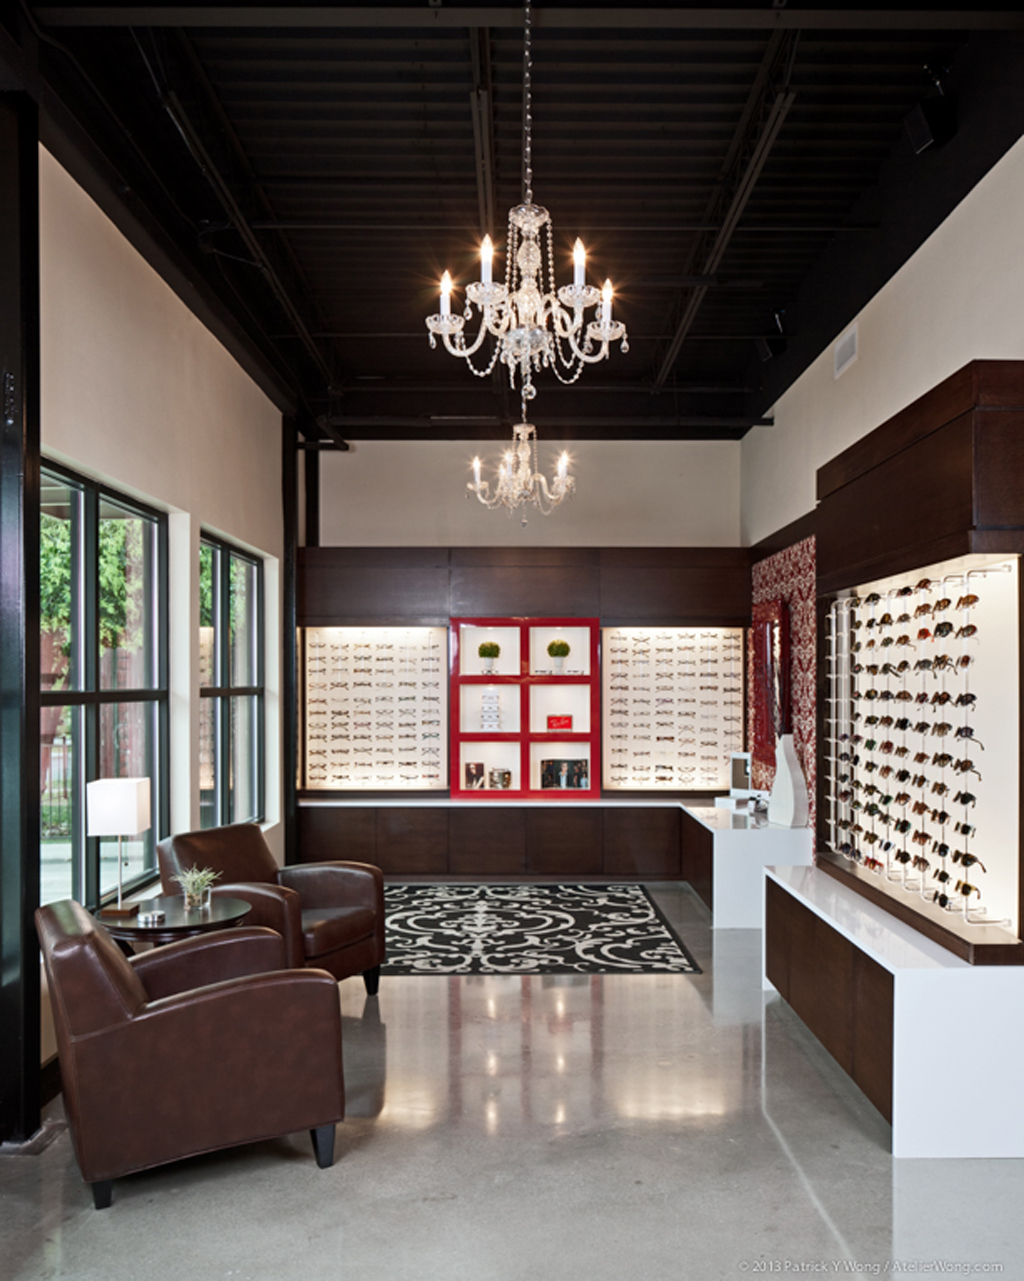 Spectacle Eye Design - The Place for Unique Eyewear designed by Weiss Architects for Collin Tam OD Therapeutic Optometrist